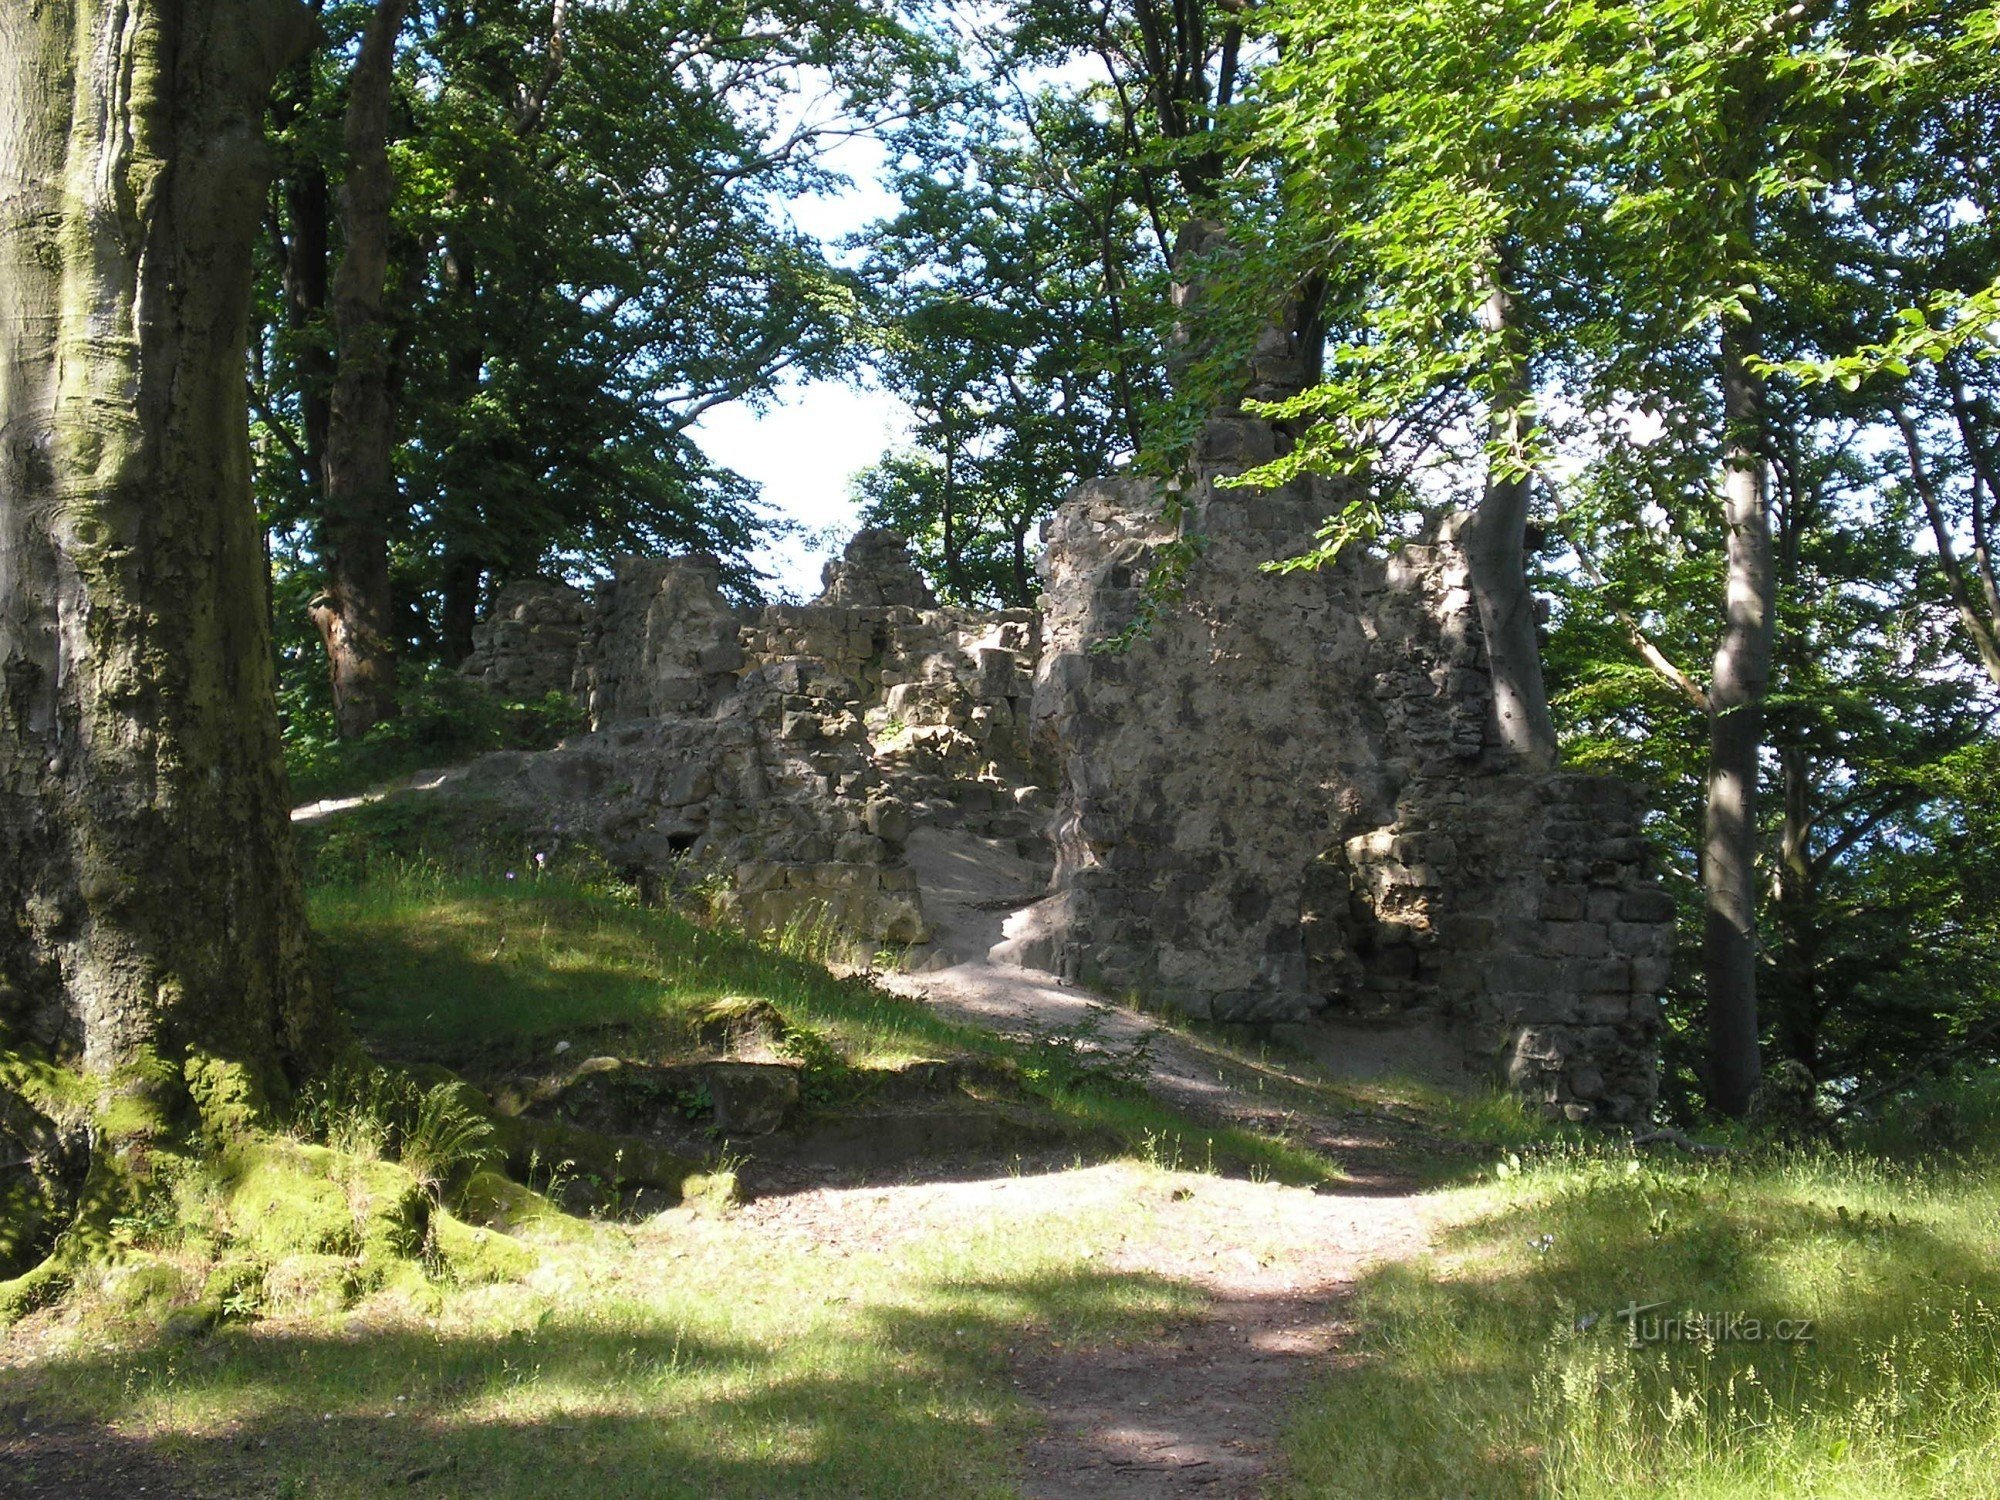 The ruins of Devin Castle